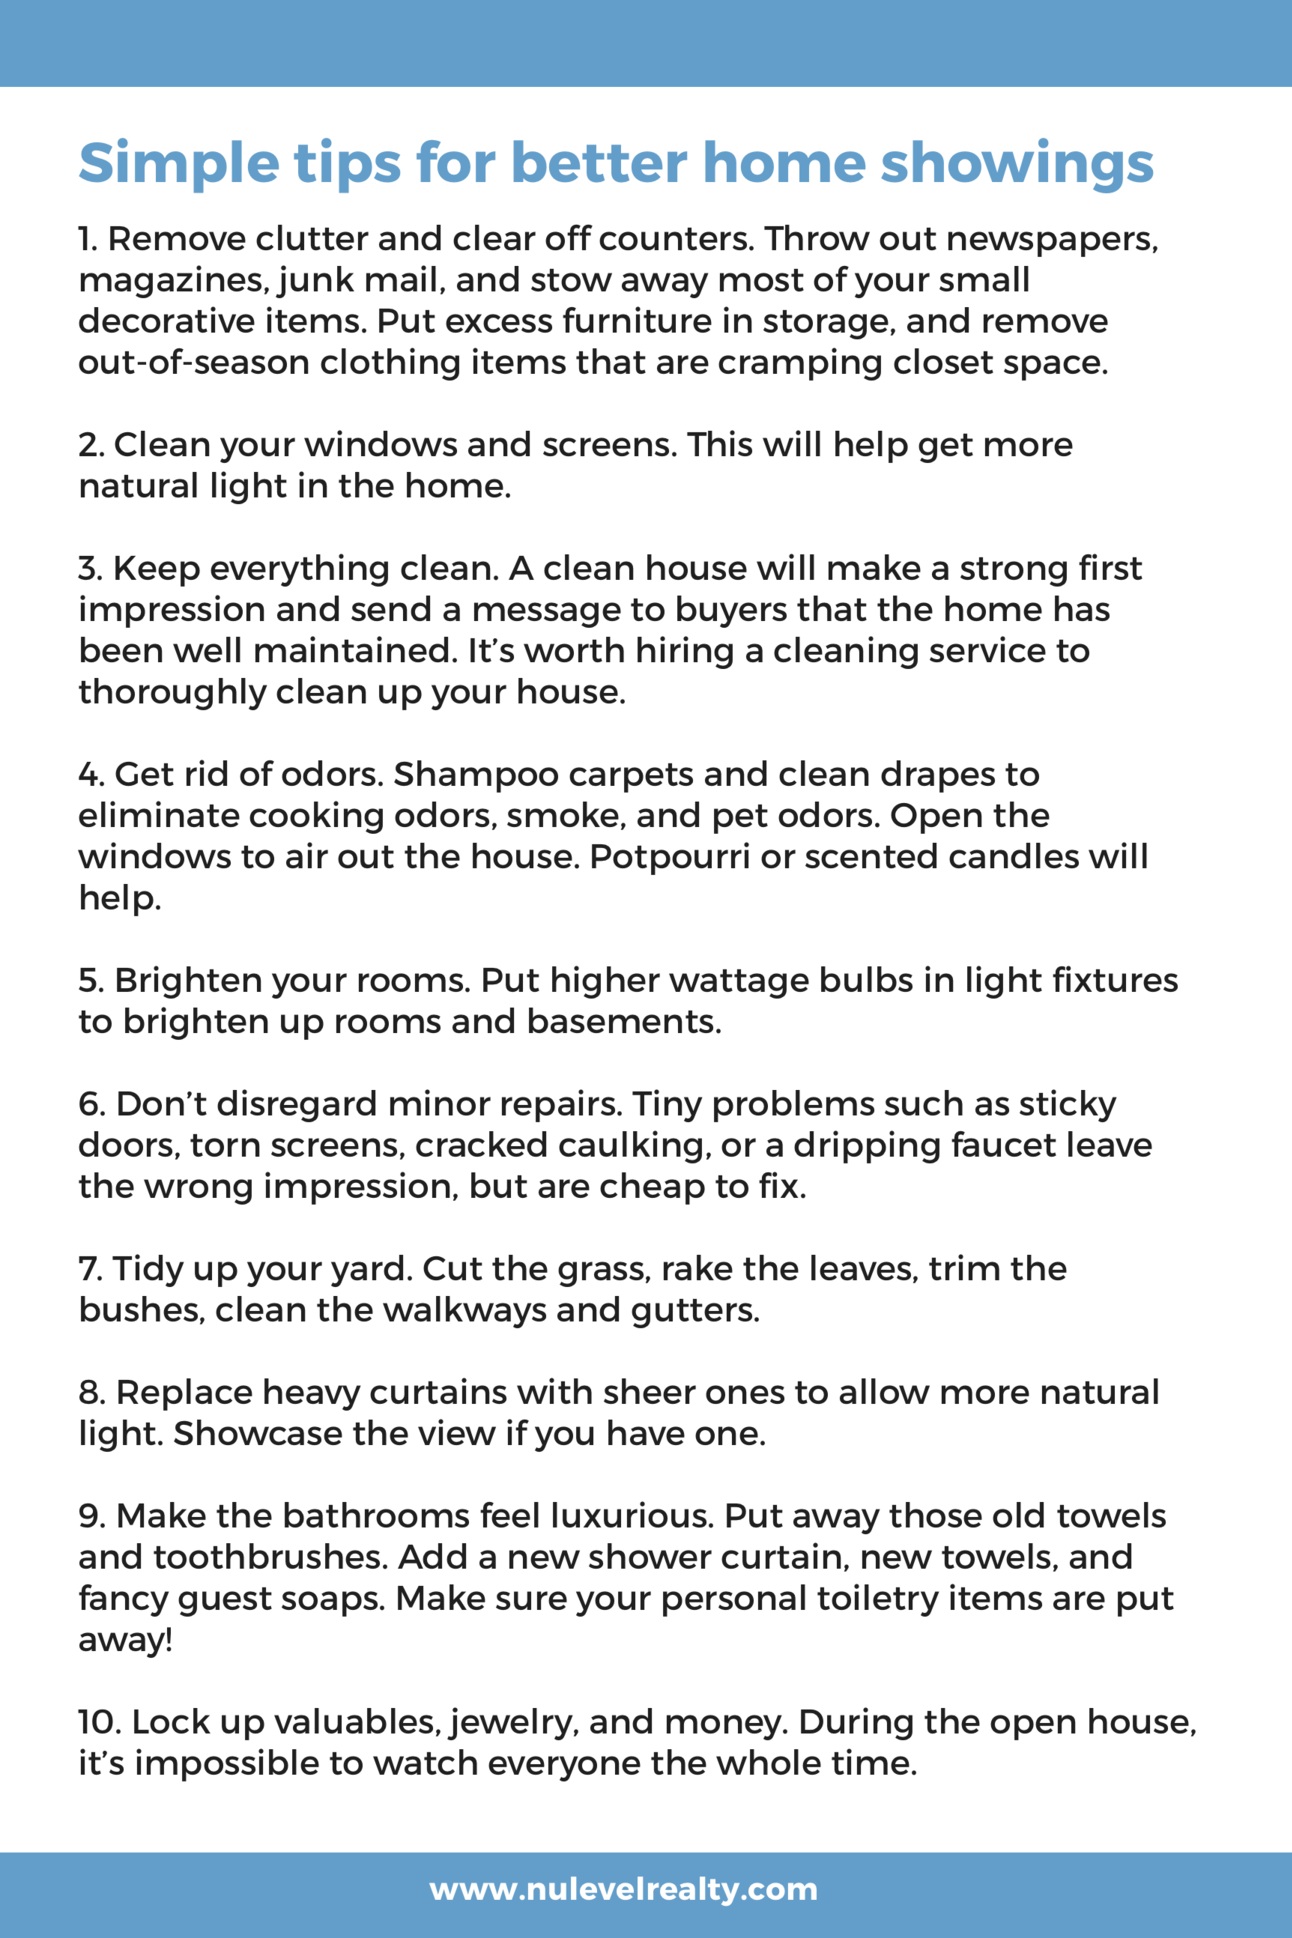 Home Selling Basics 10 tips.png